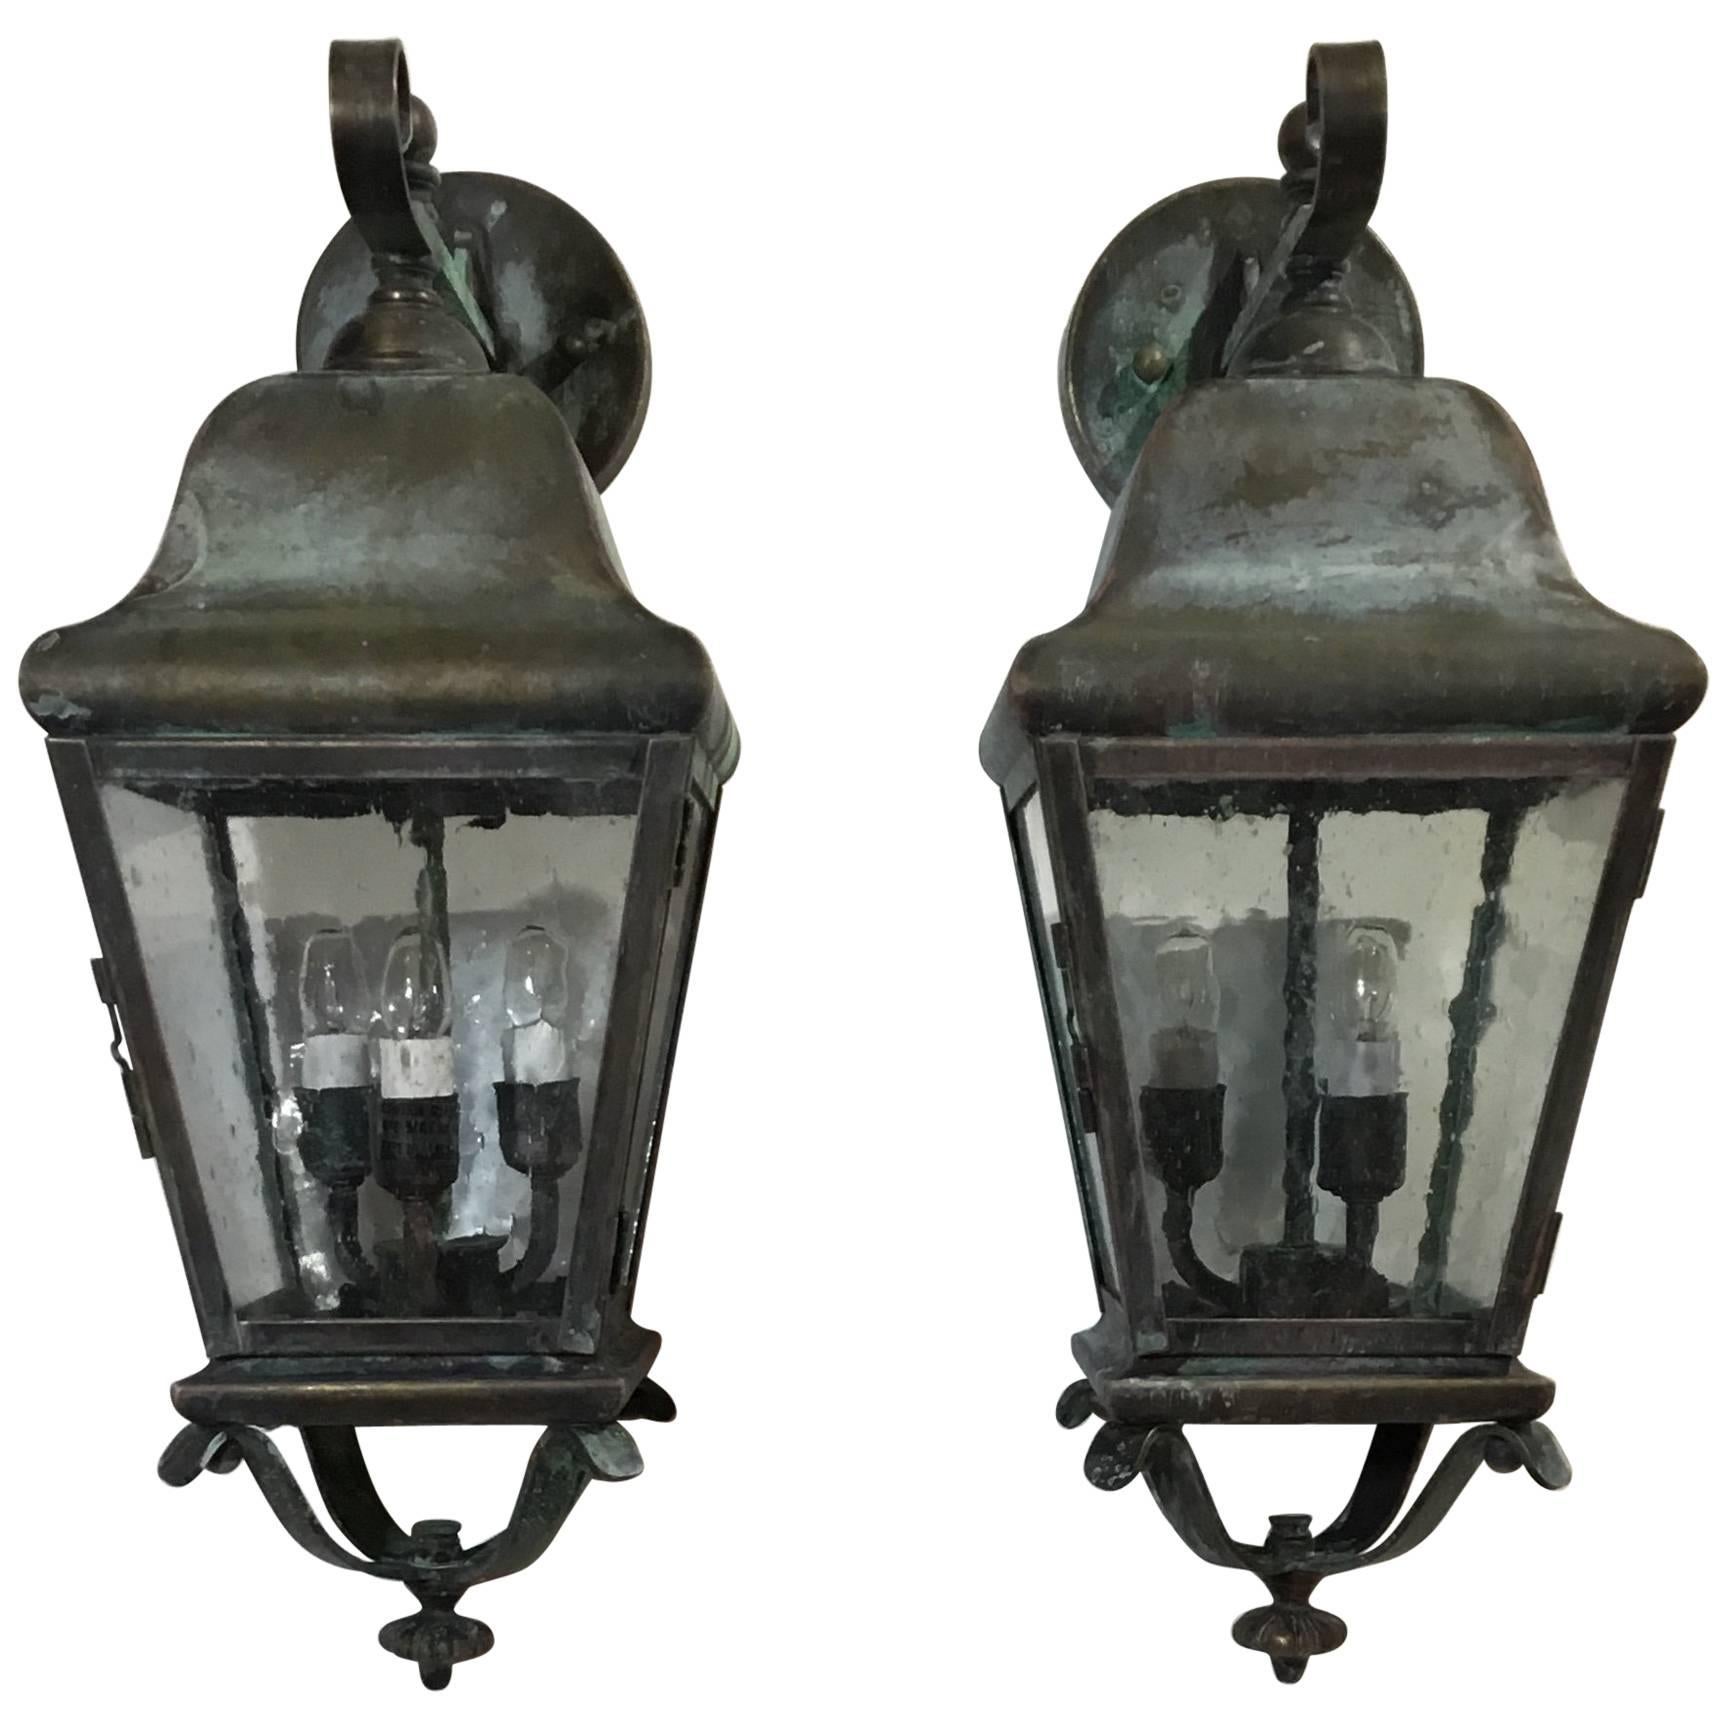 Pair of Handcrafted Solid Brass Wall Lanterns